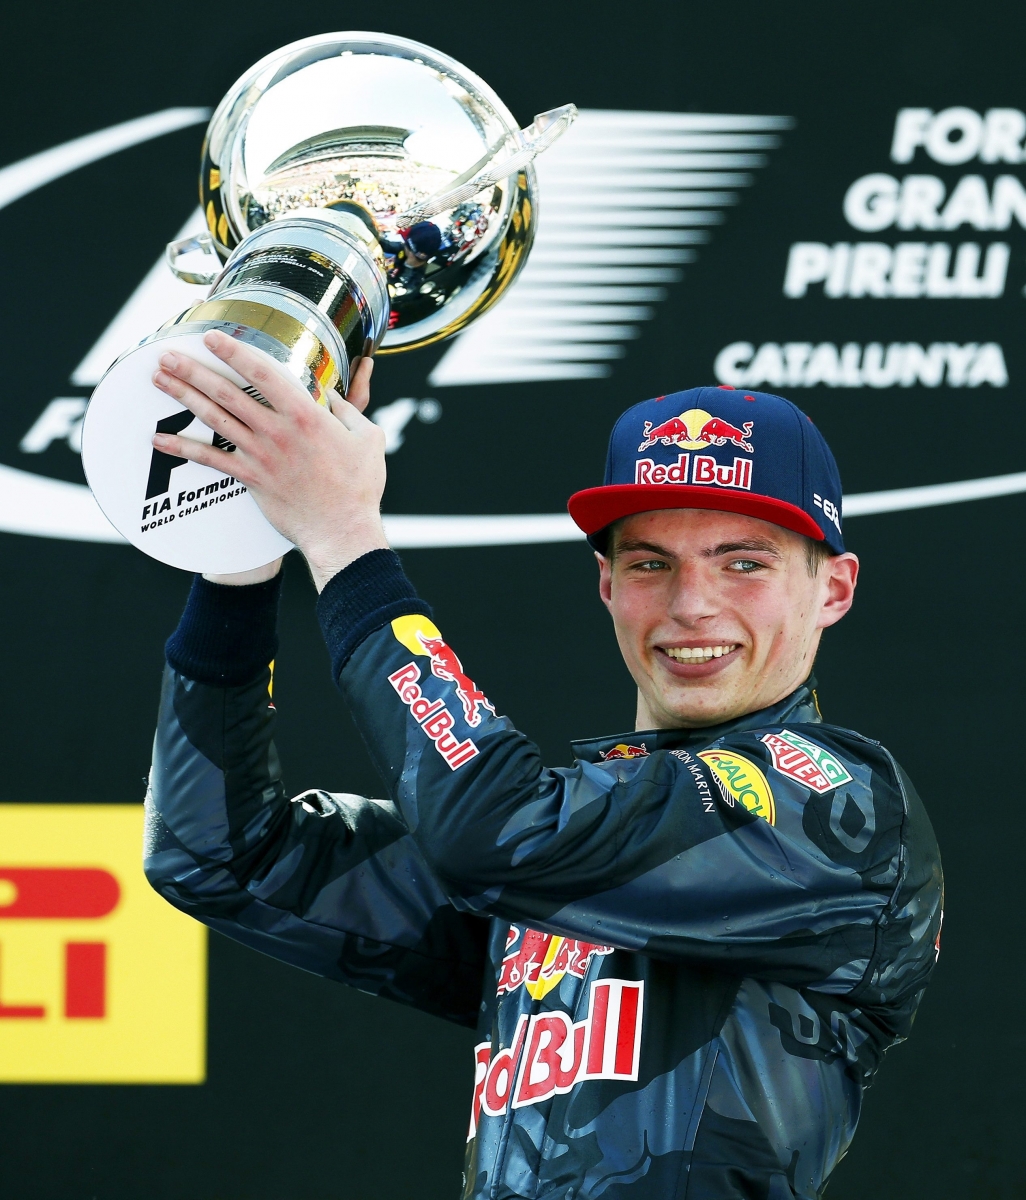 epa05307952 Dutch Formula One driver Max Verstappen of Red Bull Racing celebrates with the trophy on the podium after winning the Spanish Formula One Grand Prix at the Barcelona-Catalunya circuit in Montmelo, Barcelona, Spain, 15 May 2016.  EPA/ANDREU DALMAU SPAIN FORMULA ONE GRAND PRIX